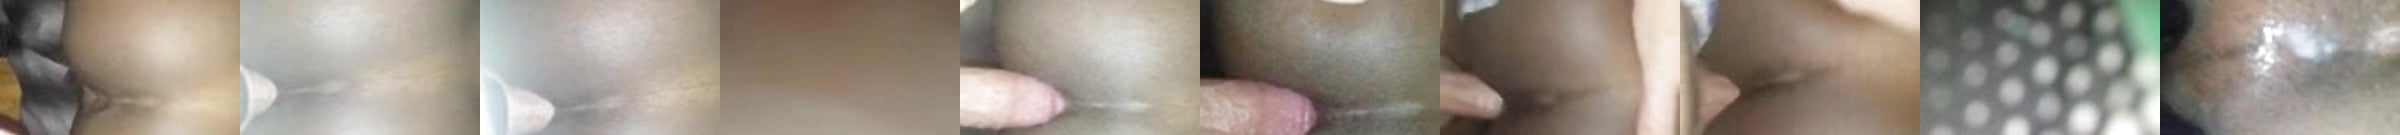 White Top Breeds Black Ass In New York Free Gay Porn Ae